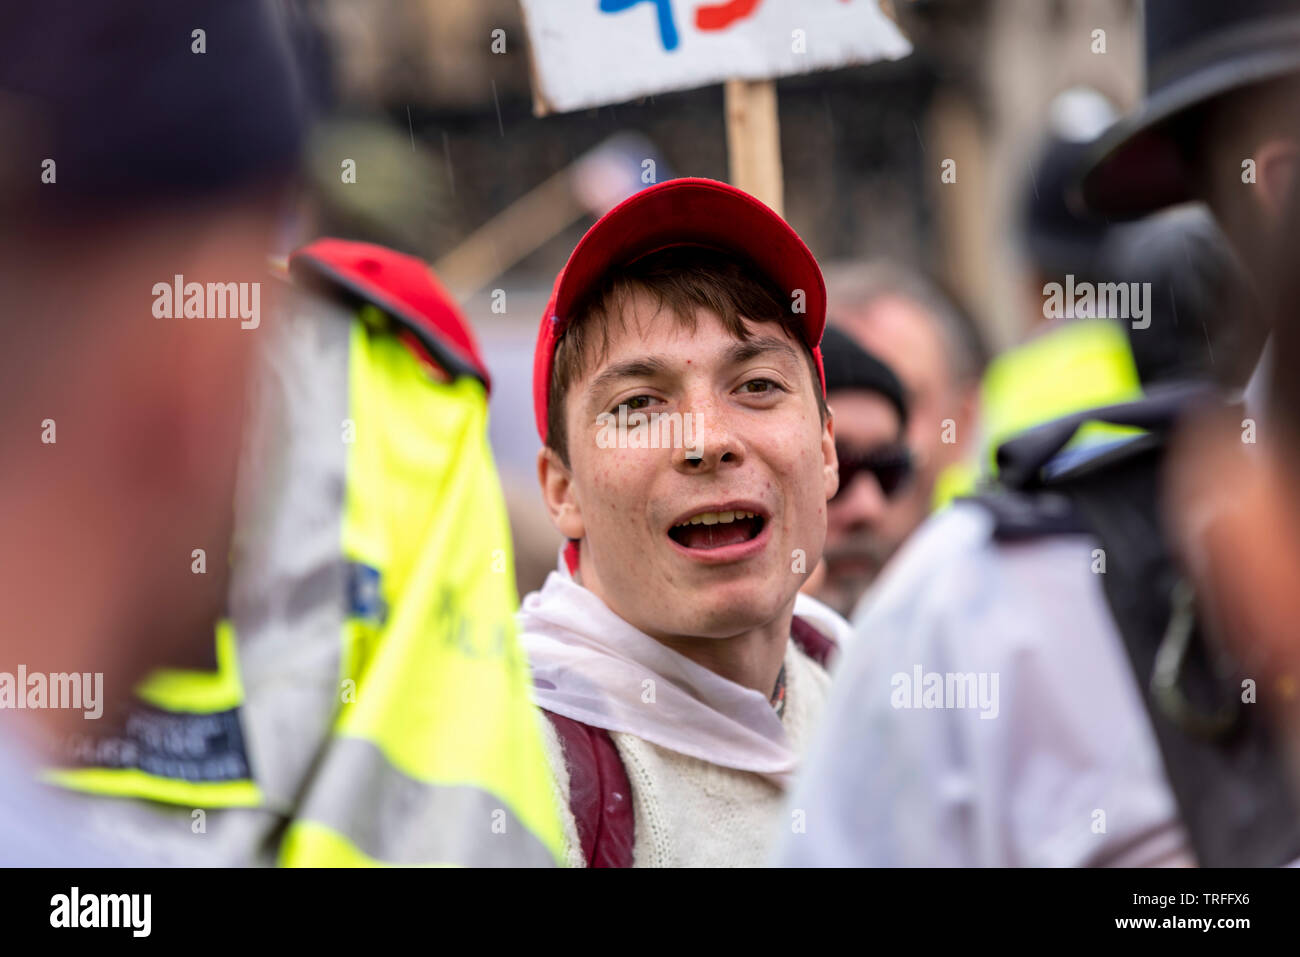 Max Hammet Millay, Trump supporter behind police cordon during anti Trump march in Whitehall London, UK during US President Donald Trump state visit Stock Photo